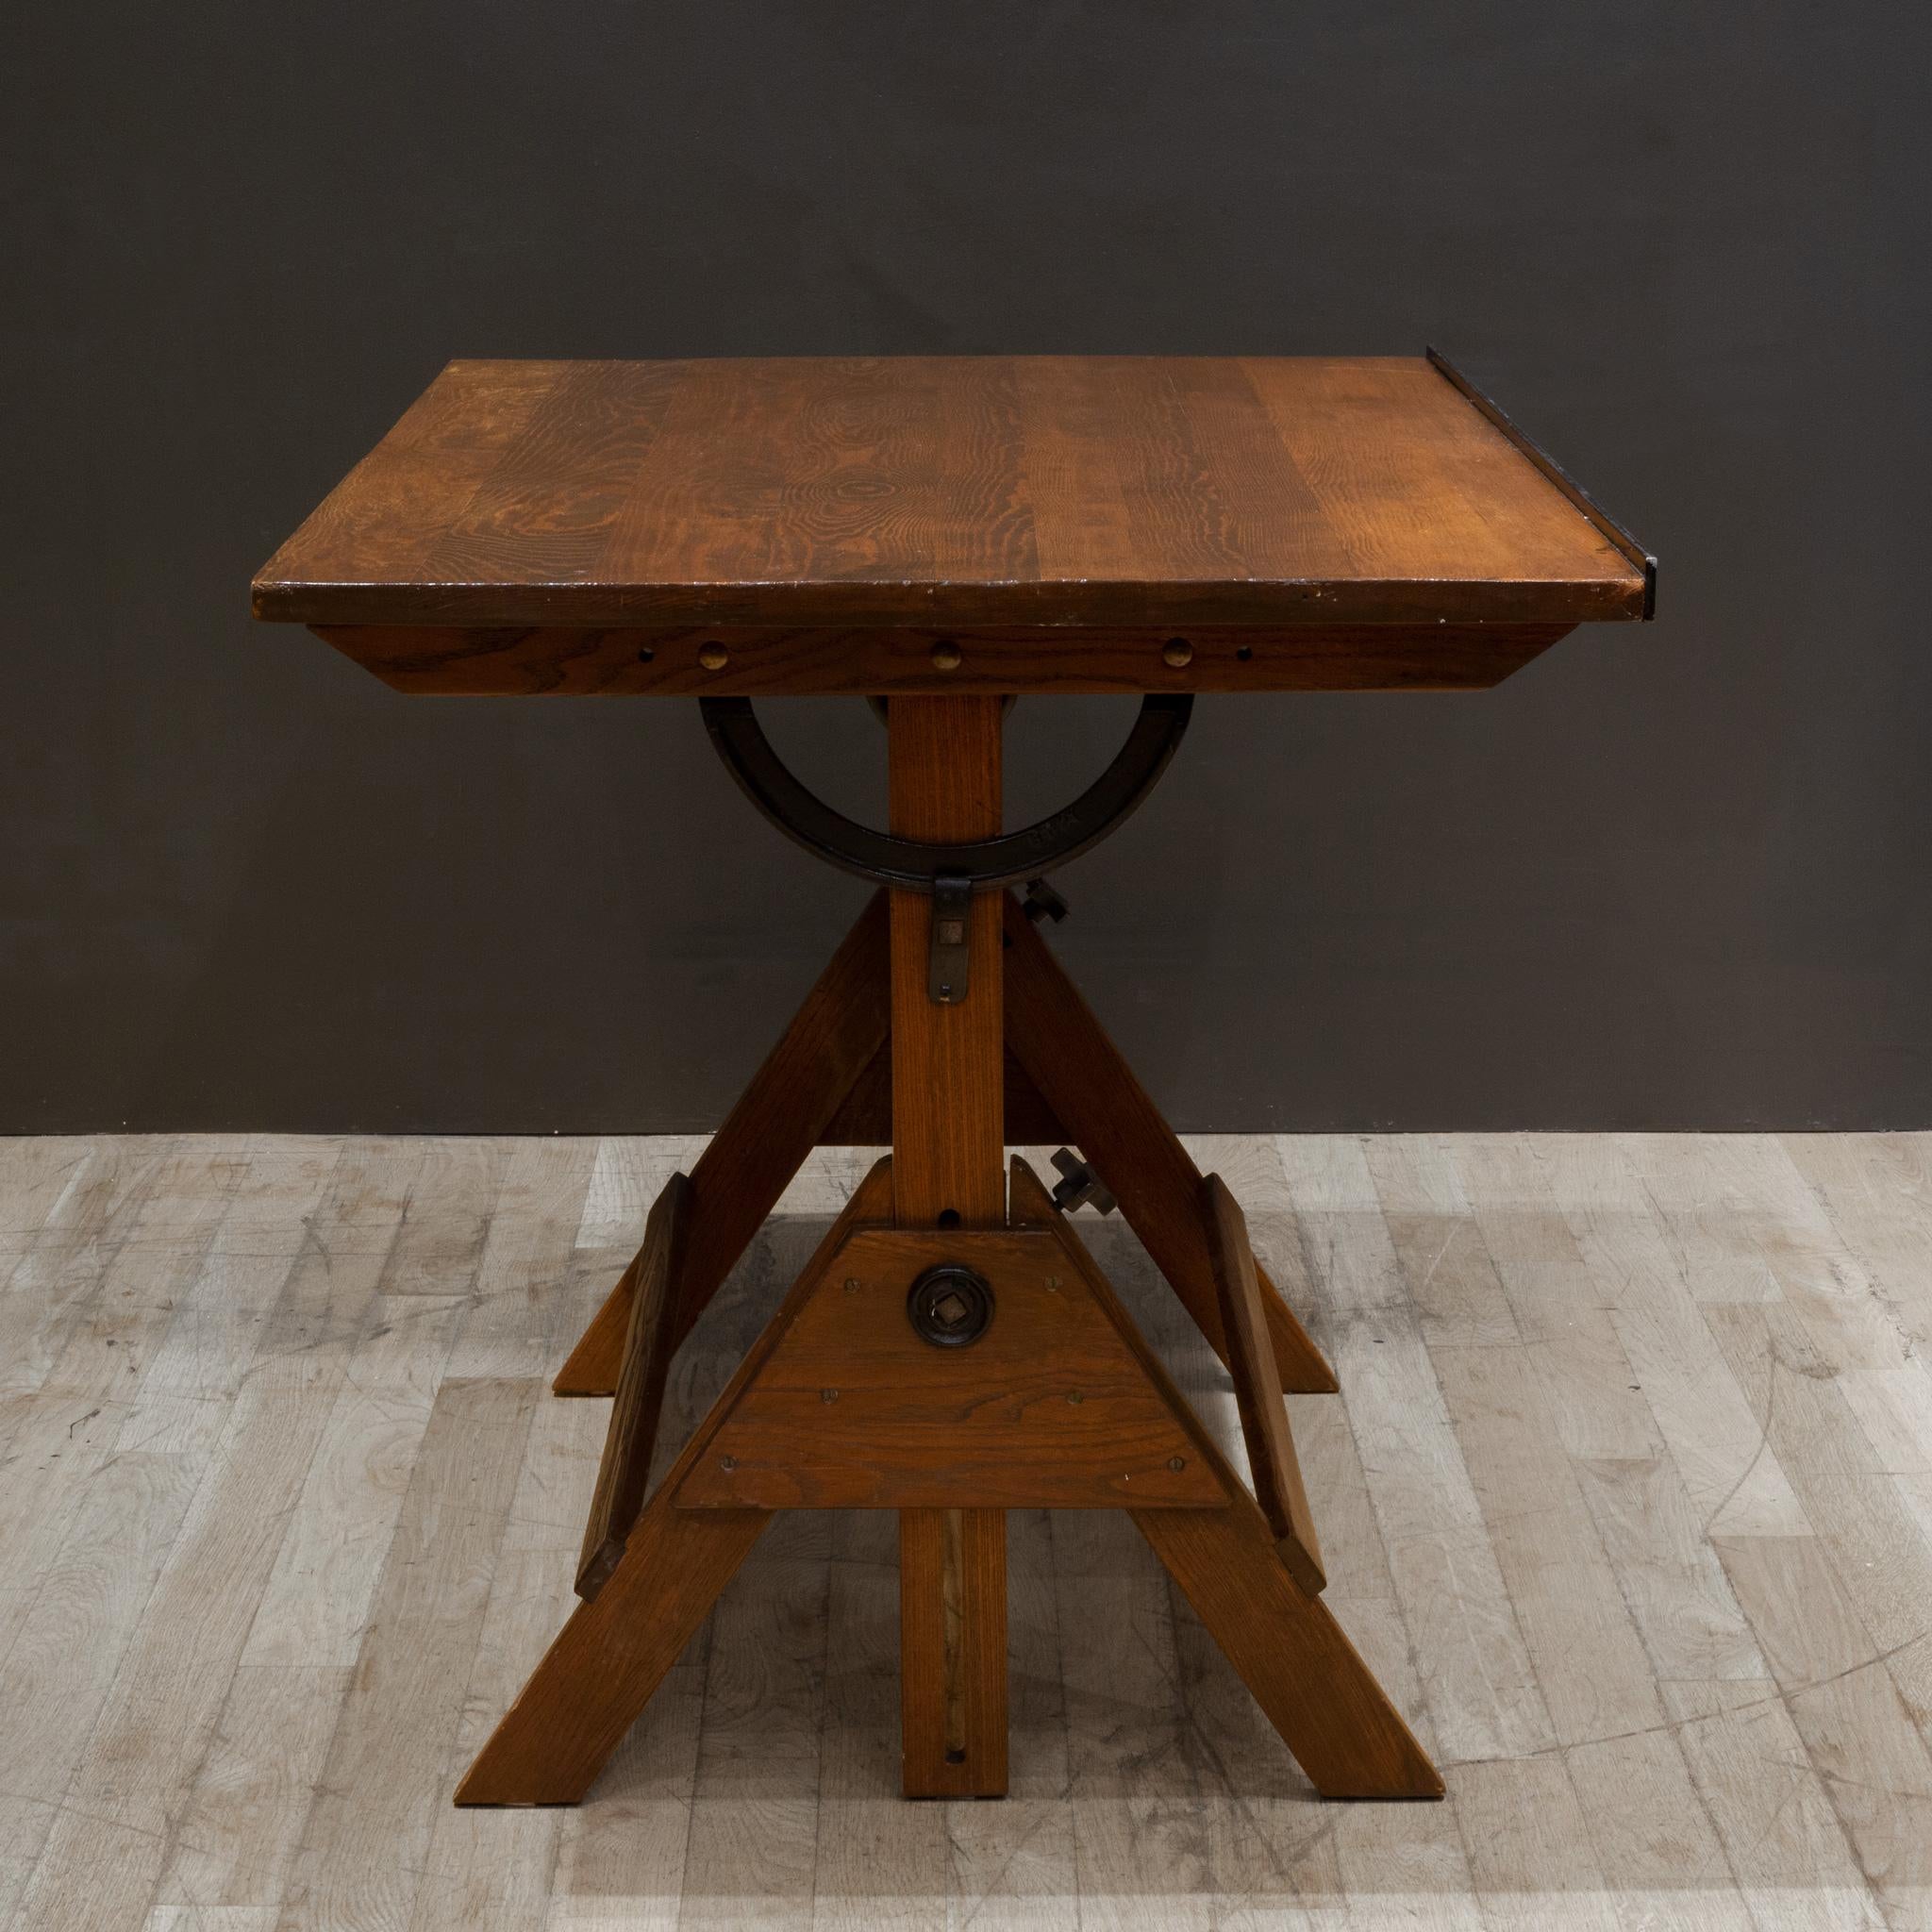 American Vintage Anco Bilt Cast Iron and Wood Drafting Table/Desk c.1950 For Sale